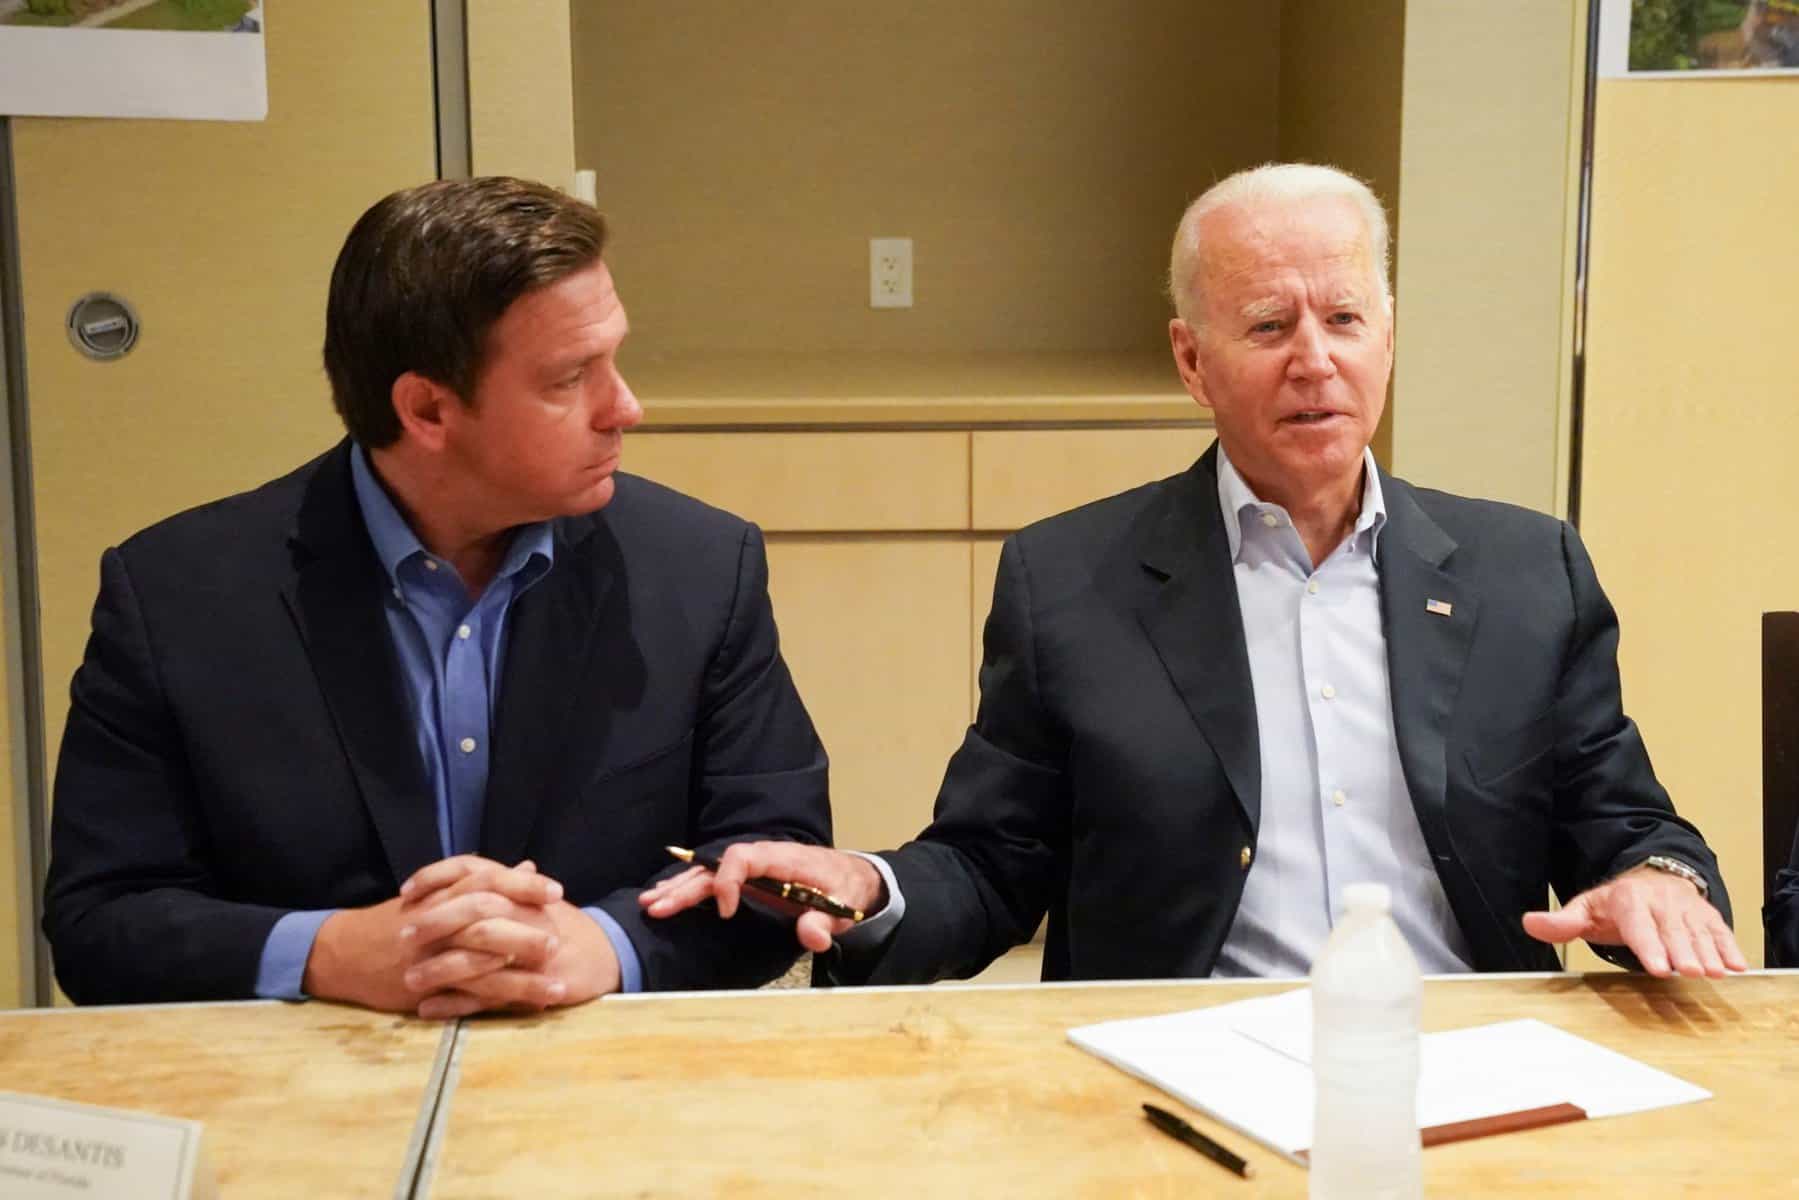 Biden Shows True Leadership And Comes Through For DeSantis And Florida Before Ian Hits